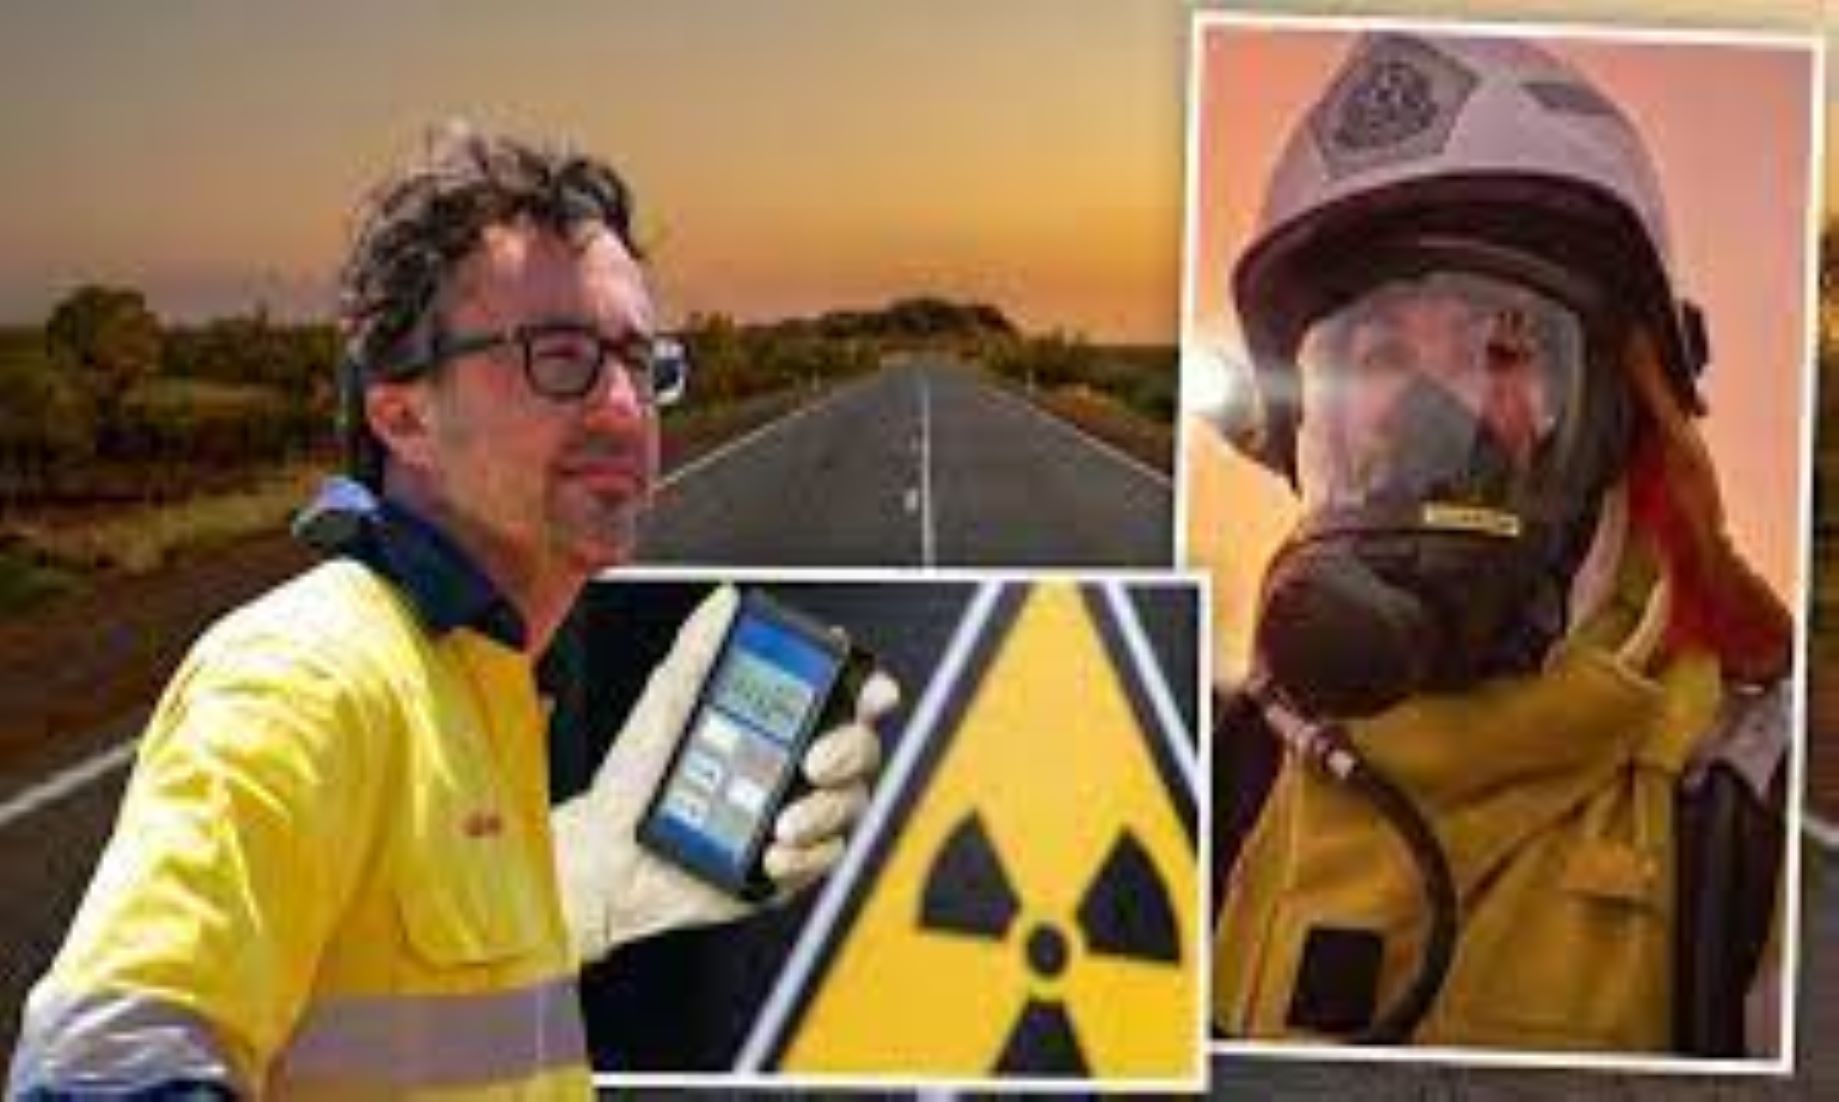 Mining Giant Apologised, Launched Investigation Over Missing Radioactive Capsule In Aussie State